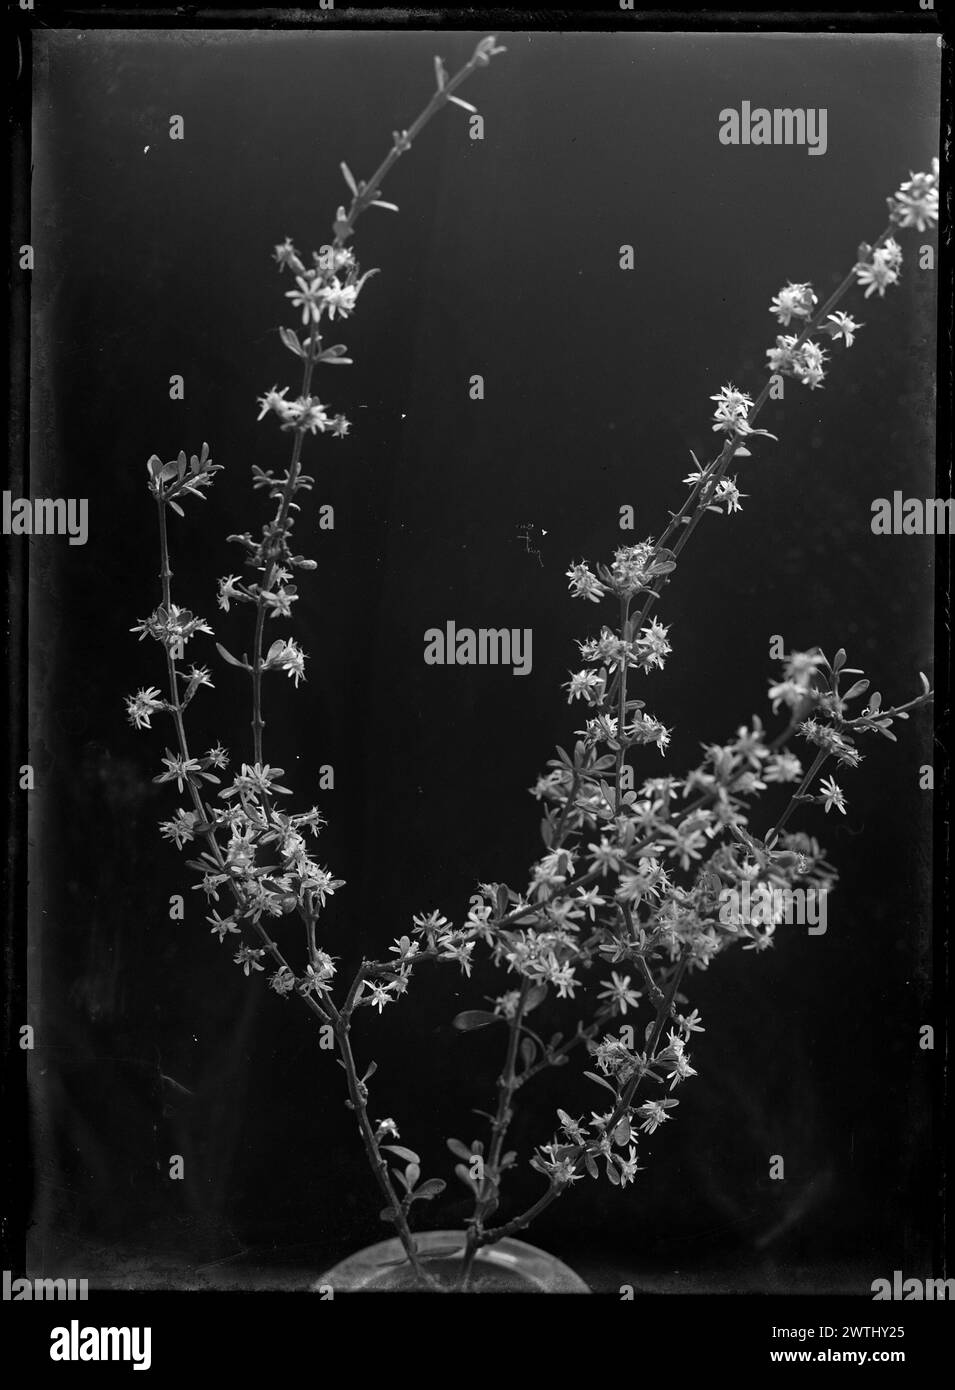 Olearia black-and-white negatives Stock Photo